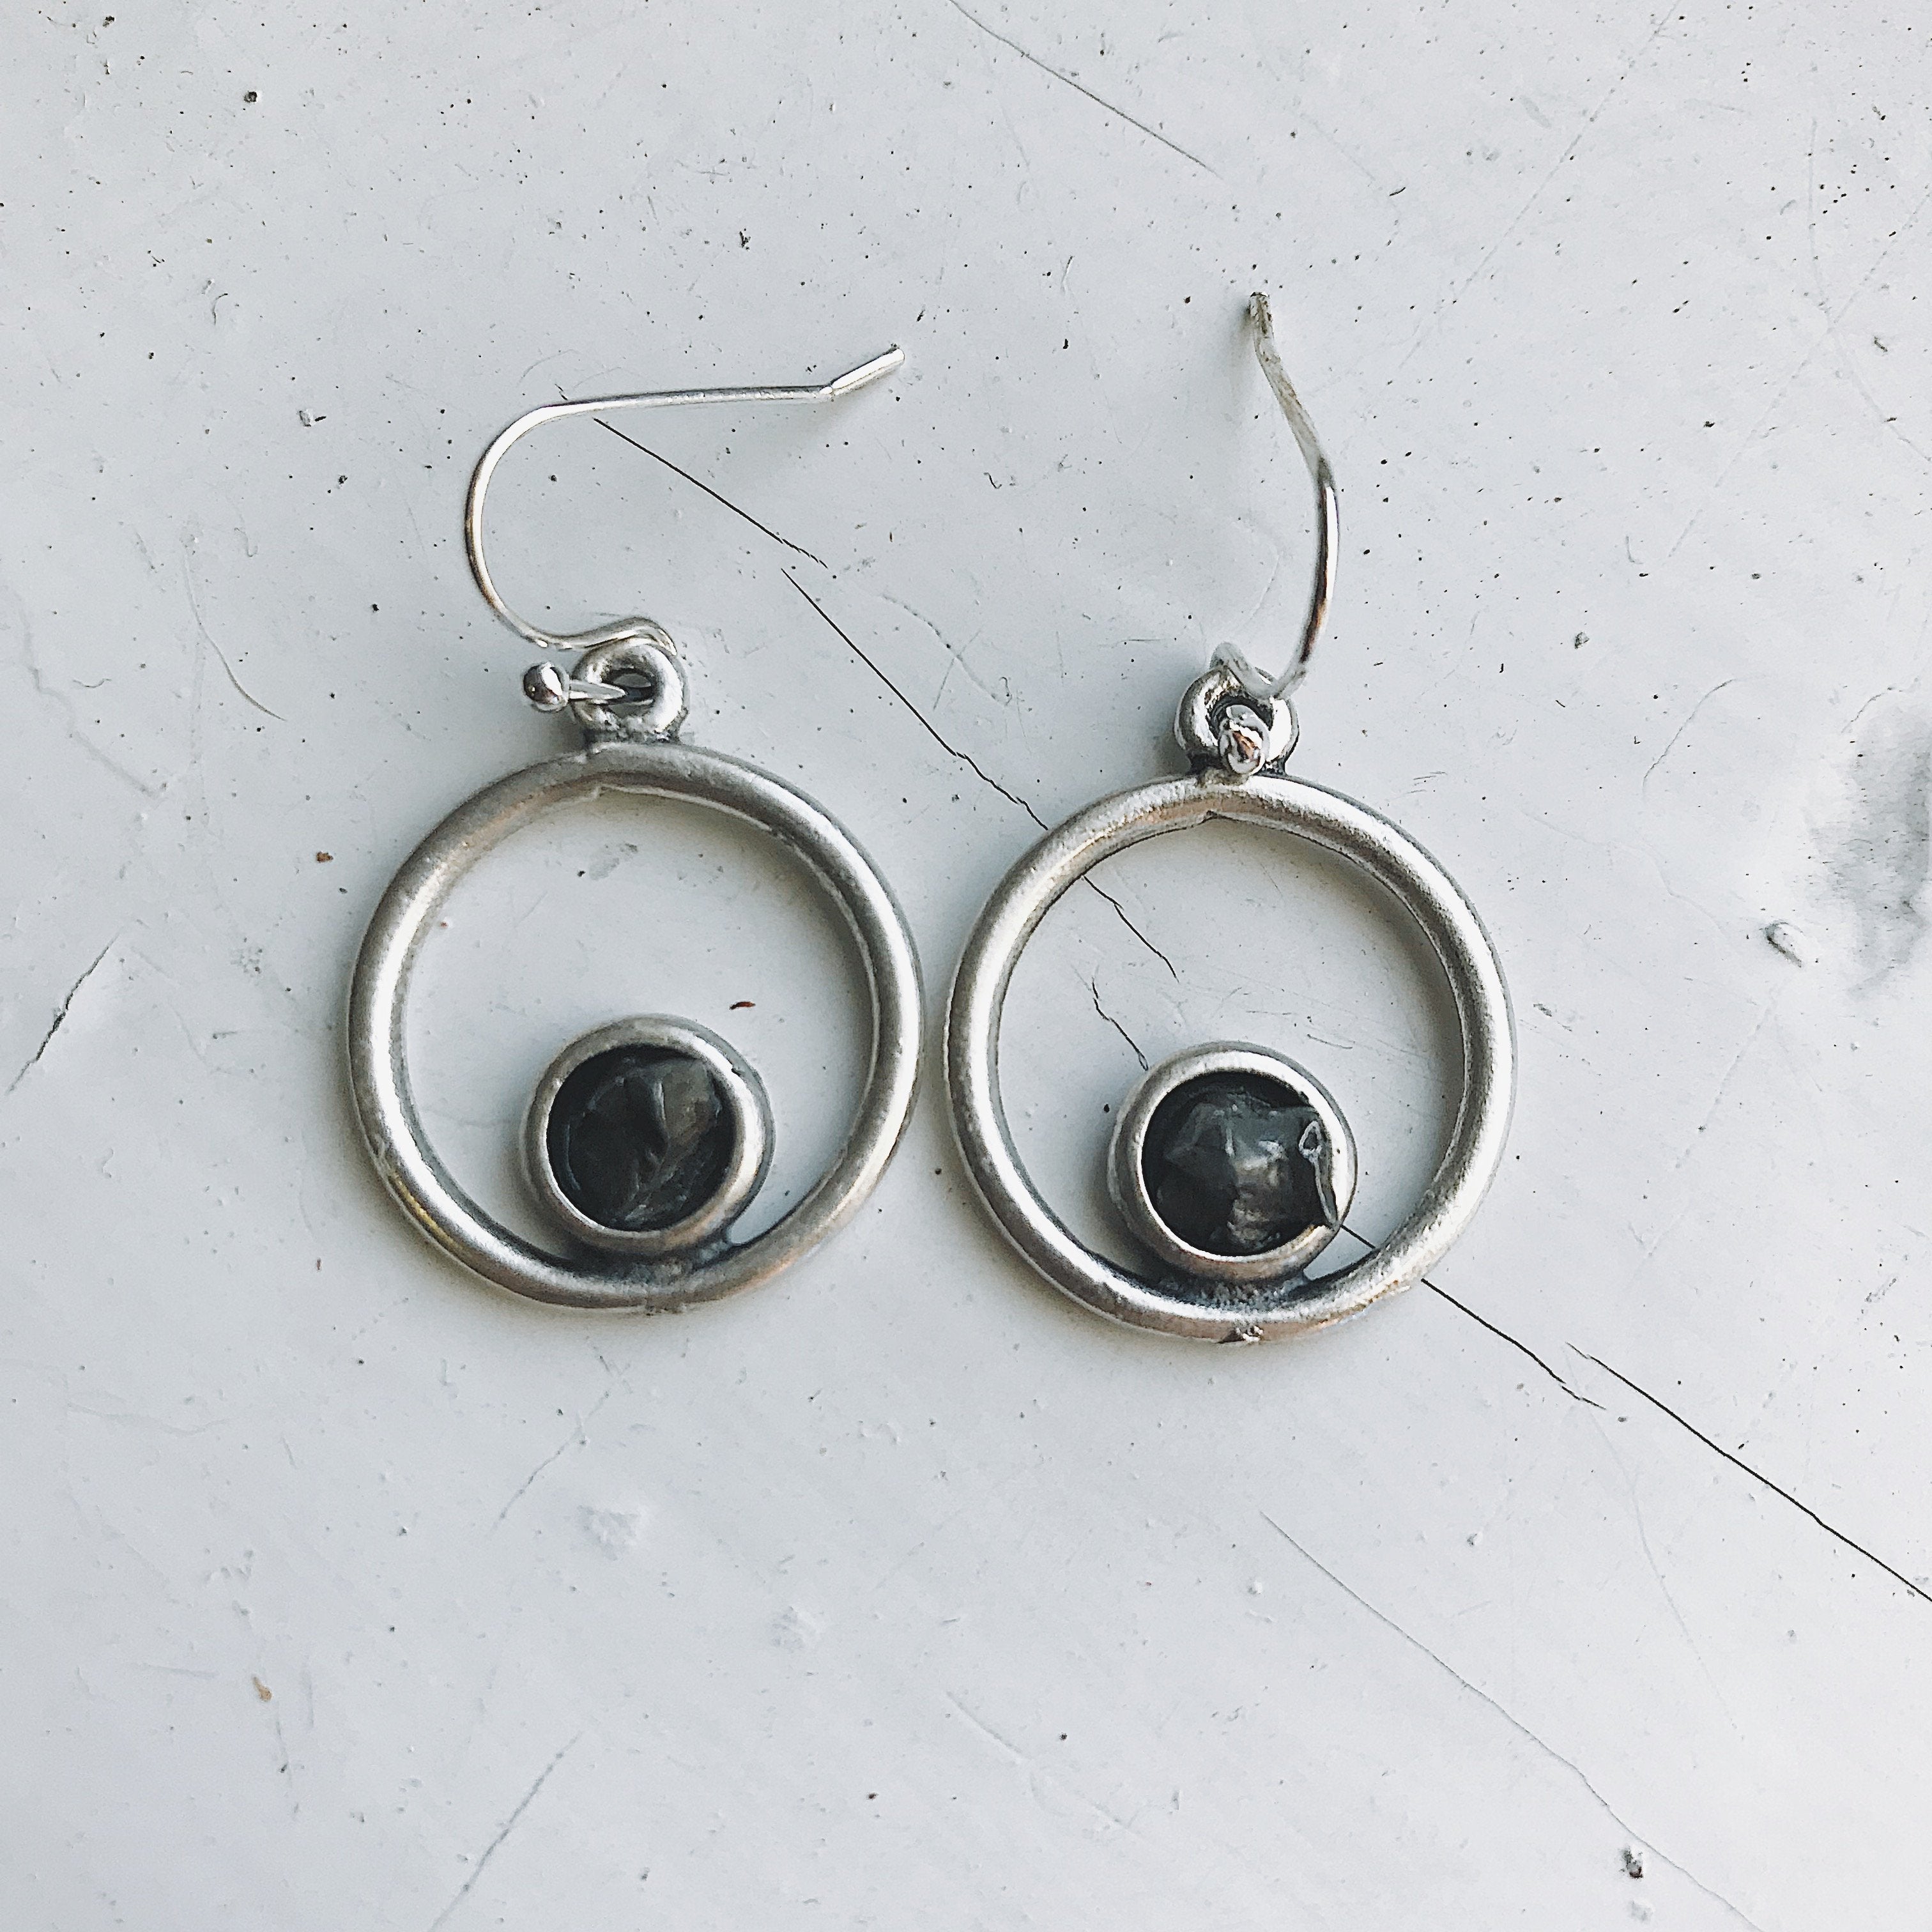 Celestial Circle Silver Earrings with Raw Meteorite - Authentic and Unique Jewelry Bijou Her